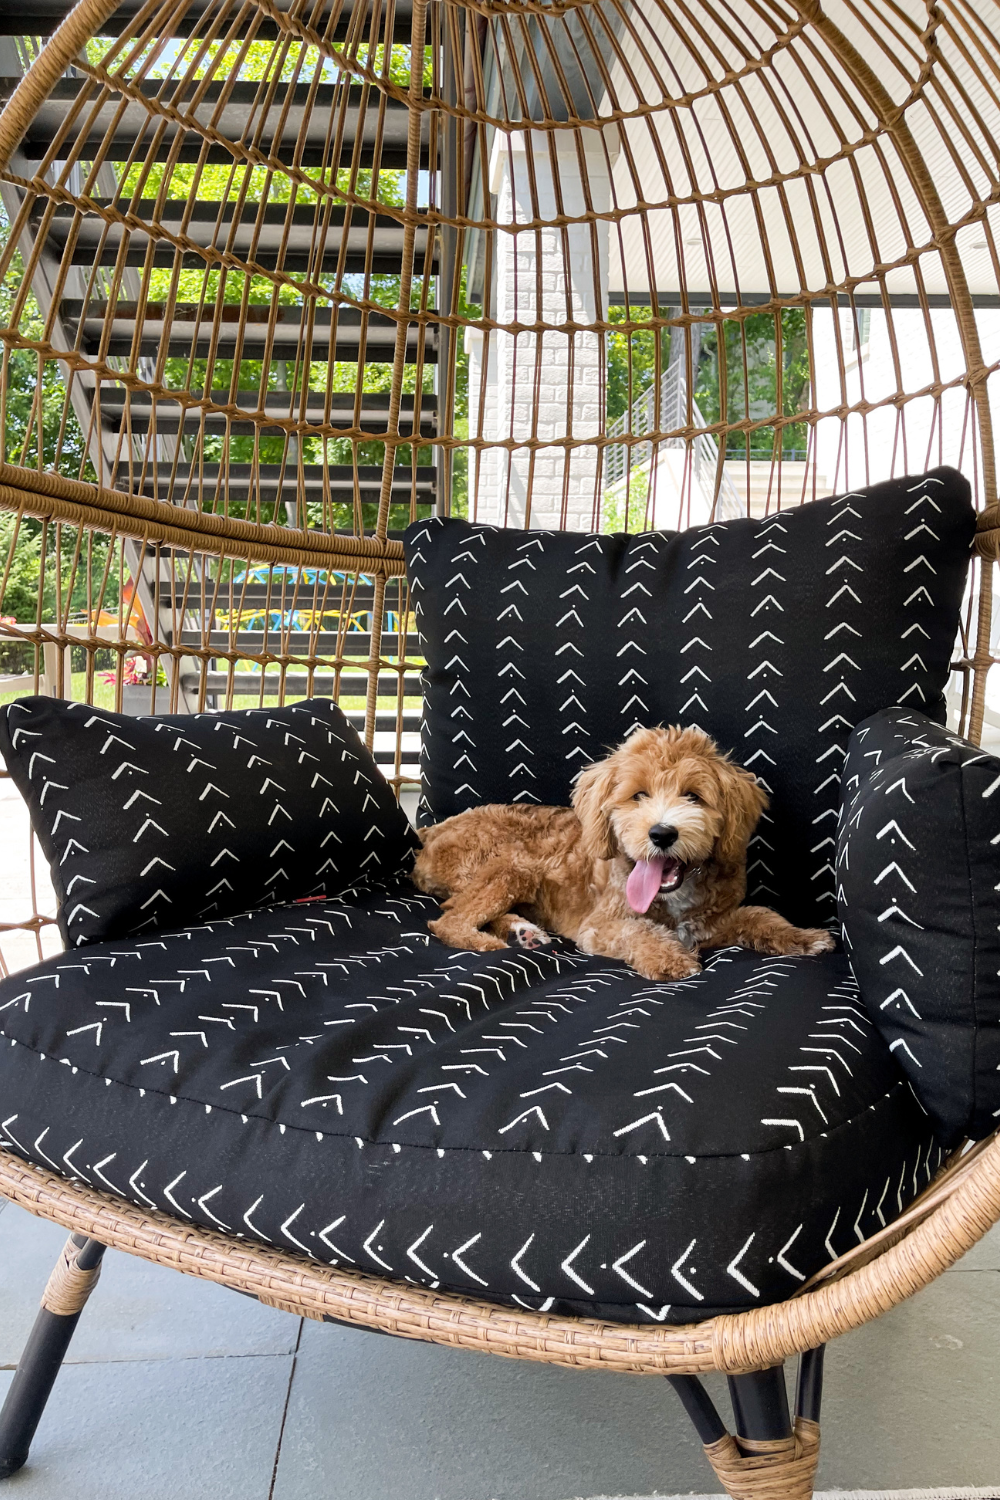 Suzanne's dog, Georgia, sitting in an outdoor egg chair